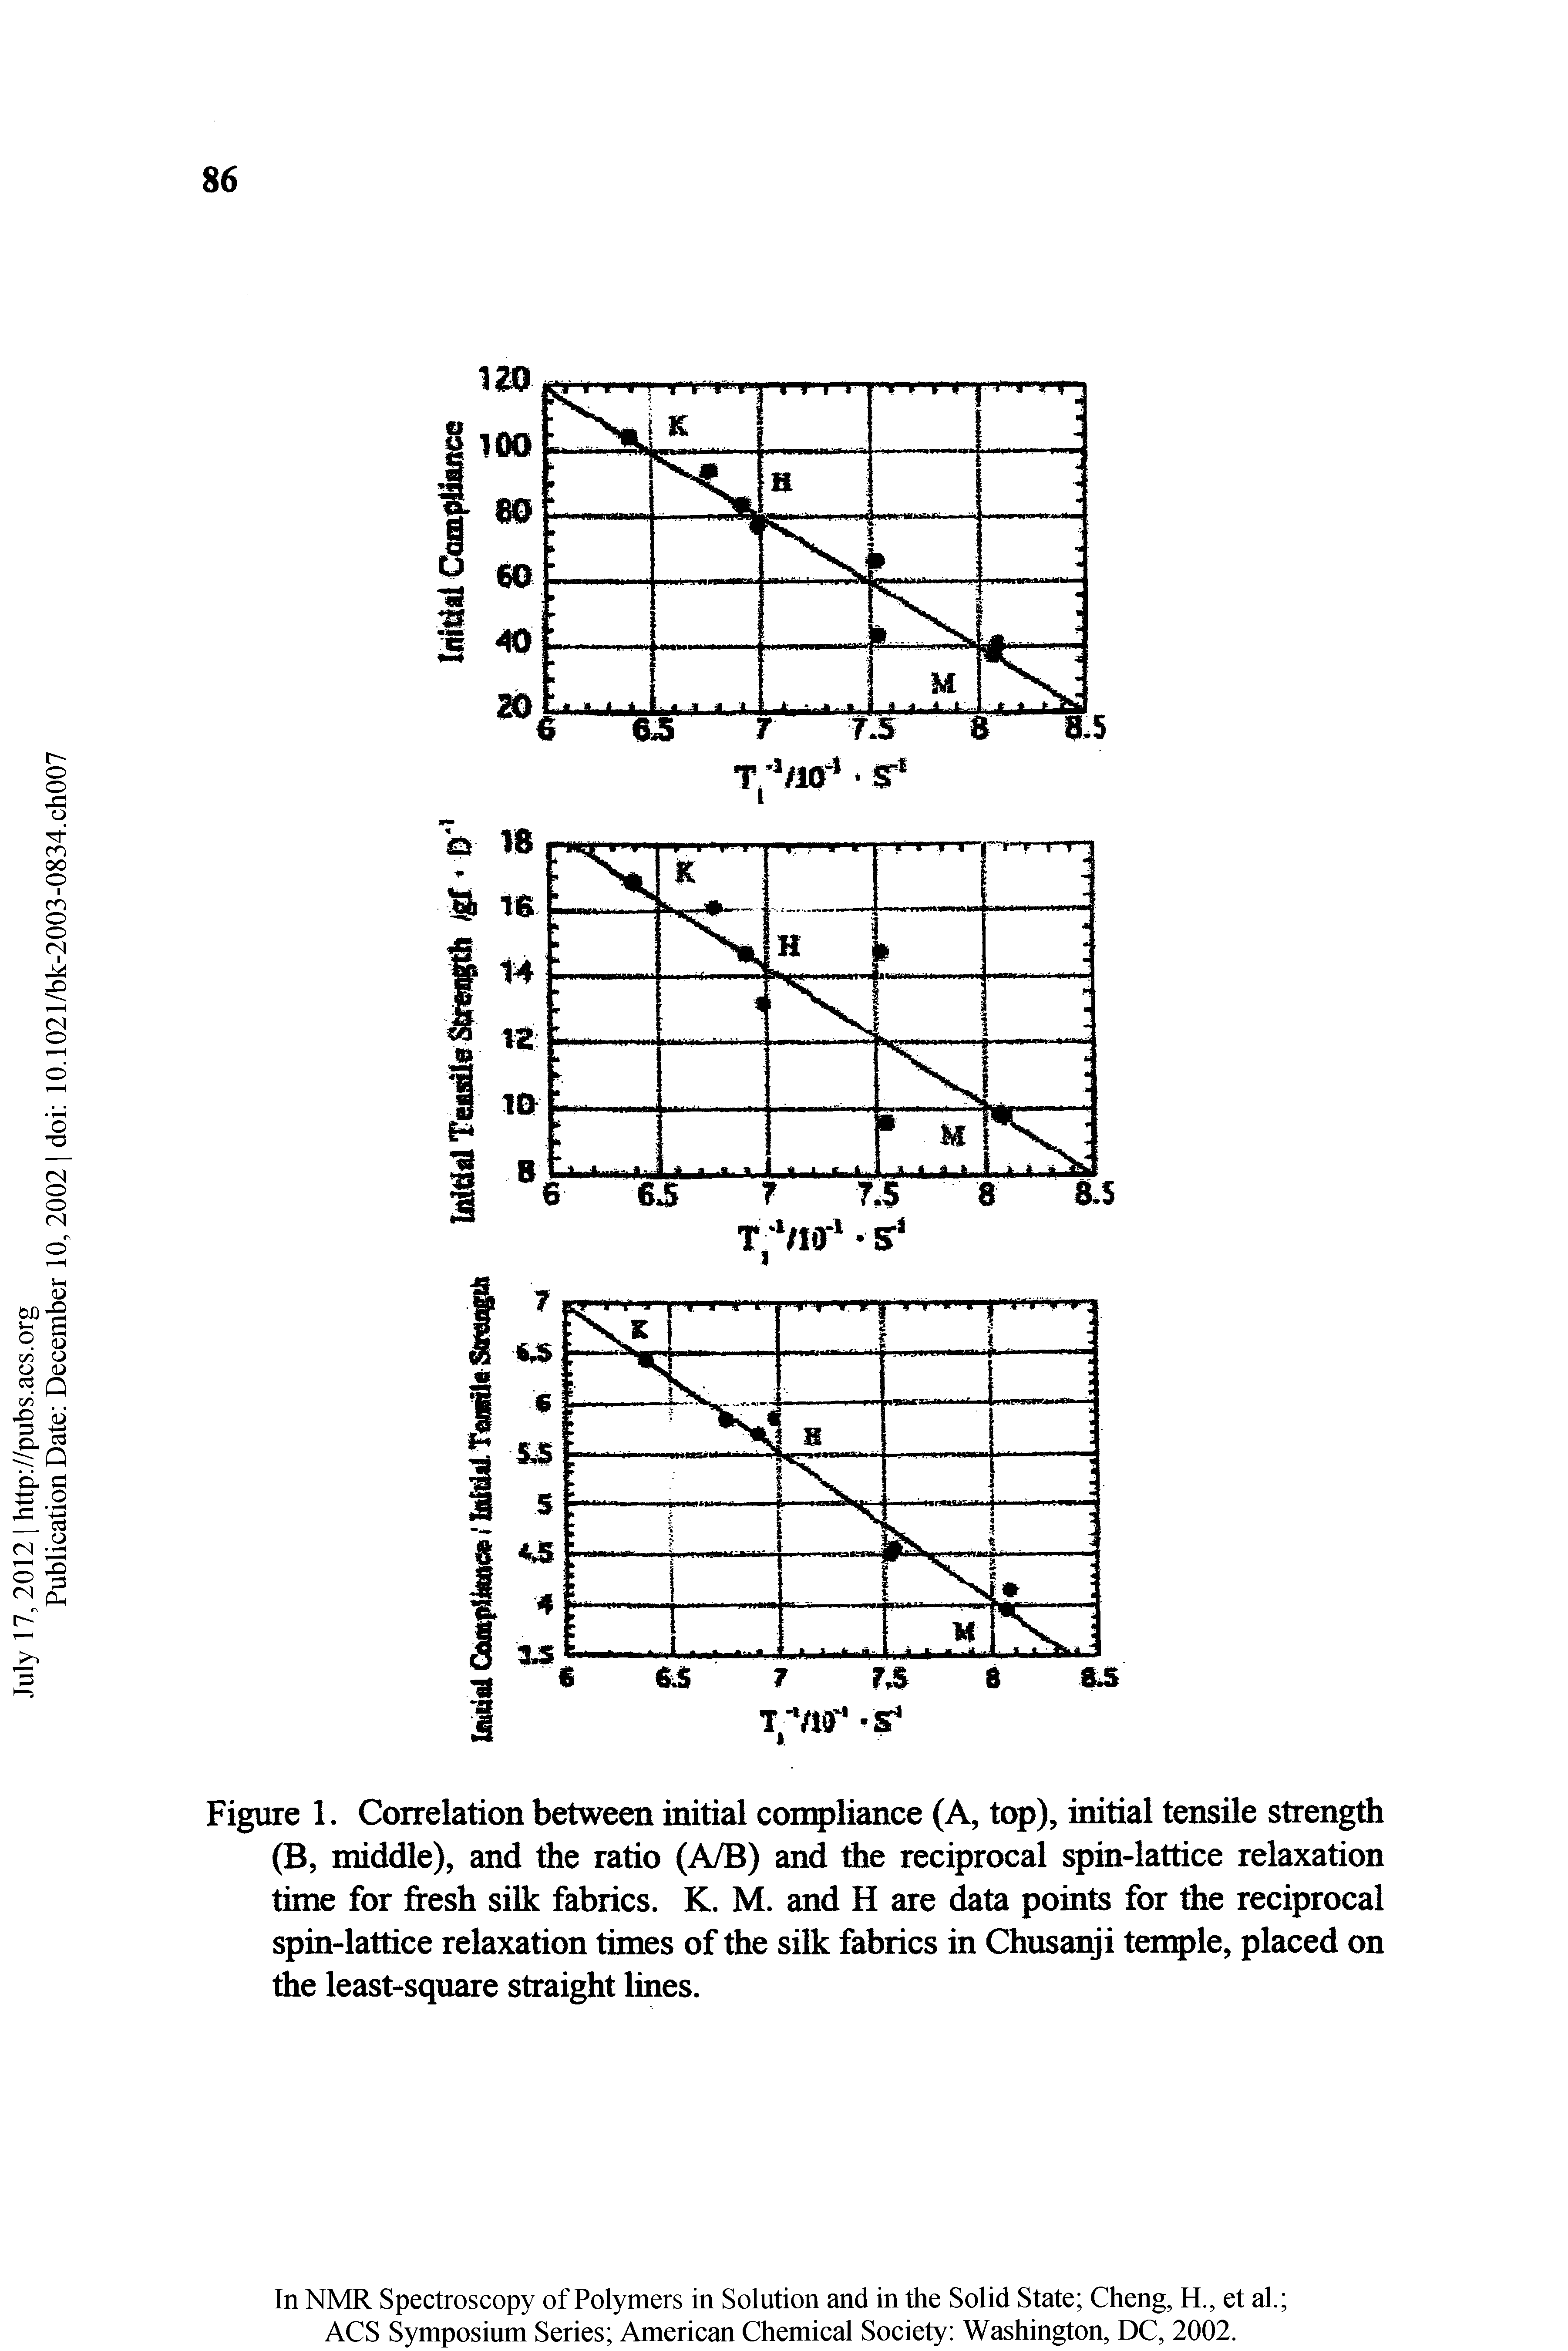 Figure 1. Correlation between initial conqjliance (A, top), initial tensile strength (B, middle), and the ratio (A/B) and the reciprocal spin-lattice relaxation time for jfresh silk fabrics. K. M. and H are data points for the reciprocal spin-lattice relaxation times of the silk fabrics in Chusanji ten jle, placed on the least-square straight lines.